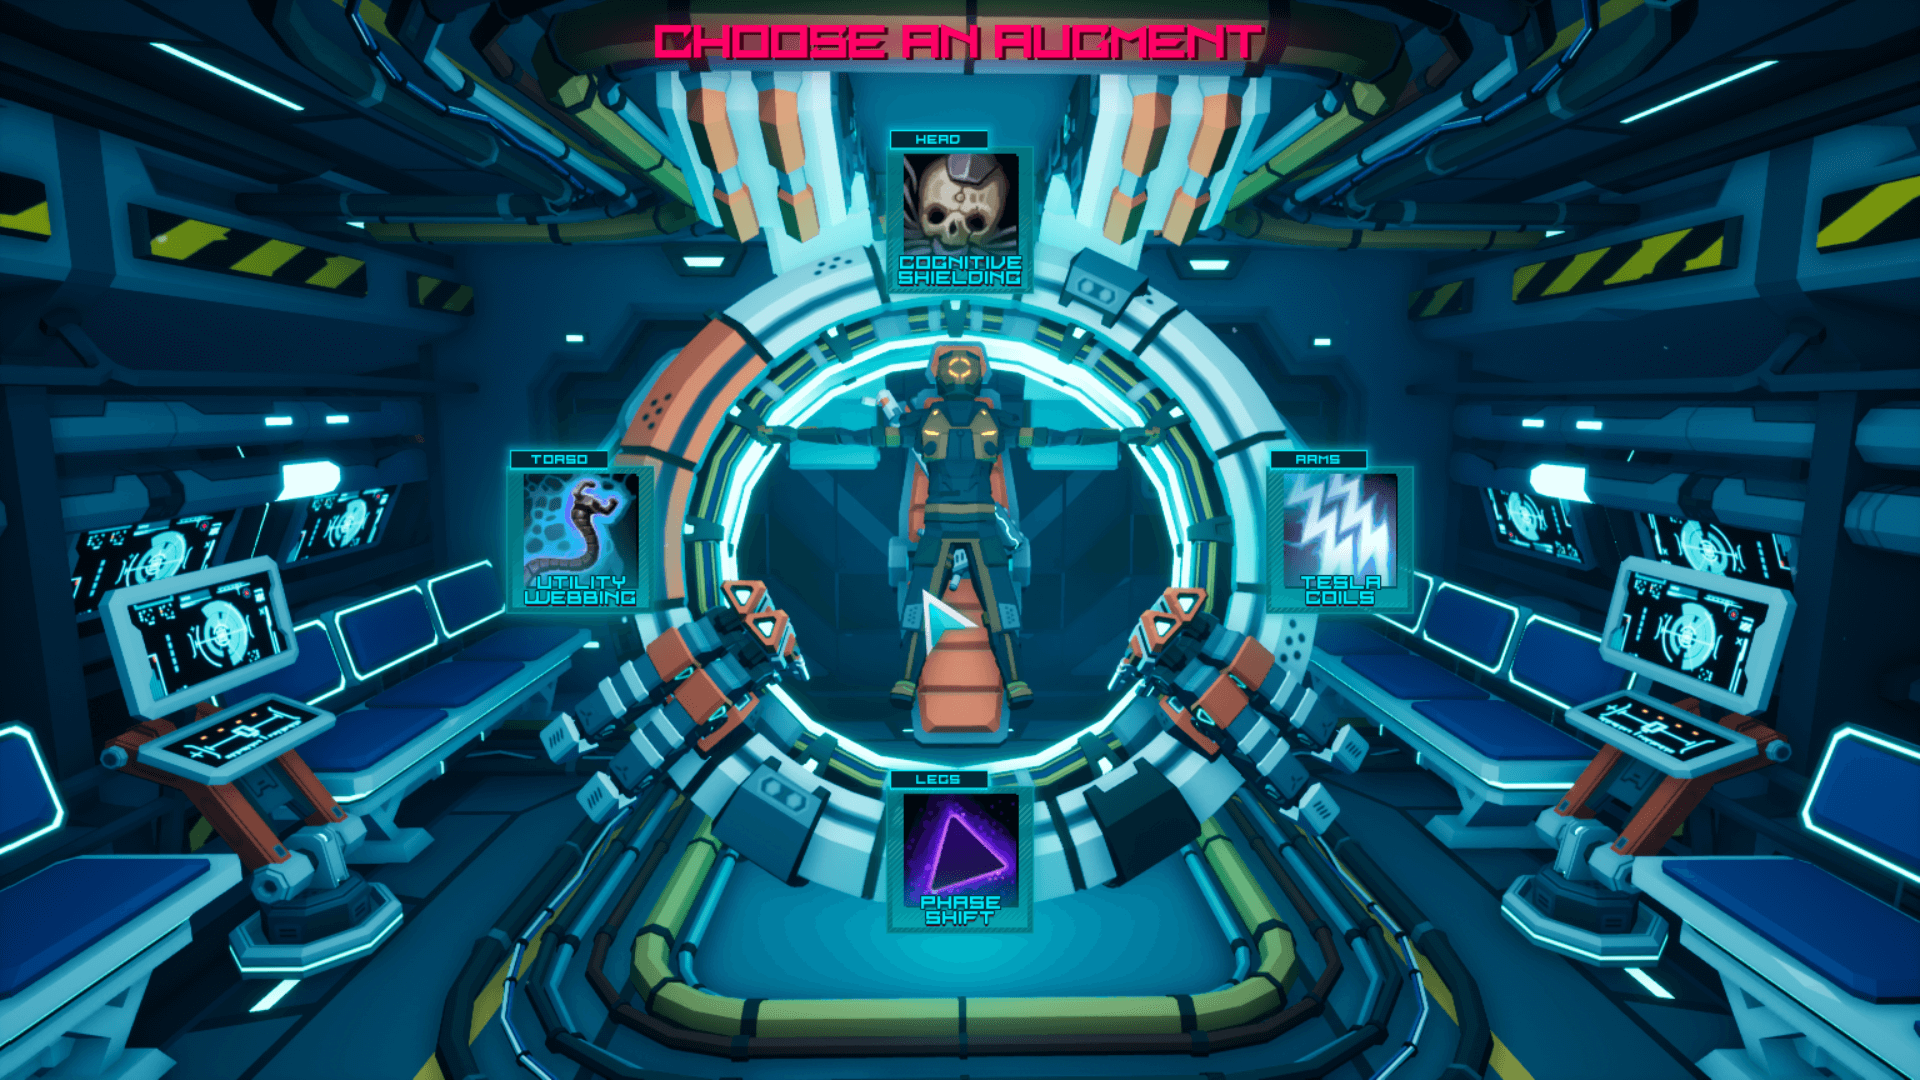 This photo shows the player in the cryo chamber whereby currency can be used to upgrade an augment to help you progress through the game.